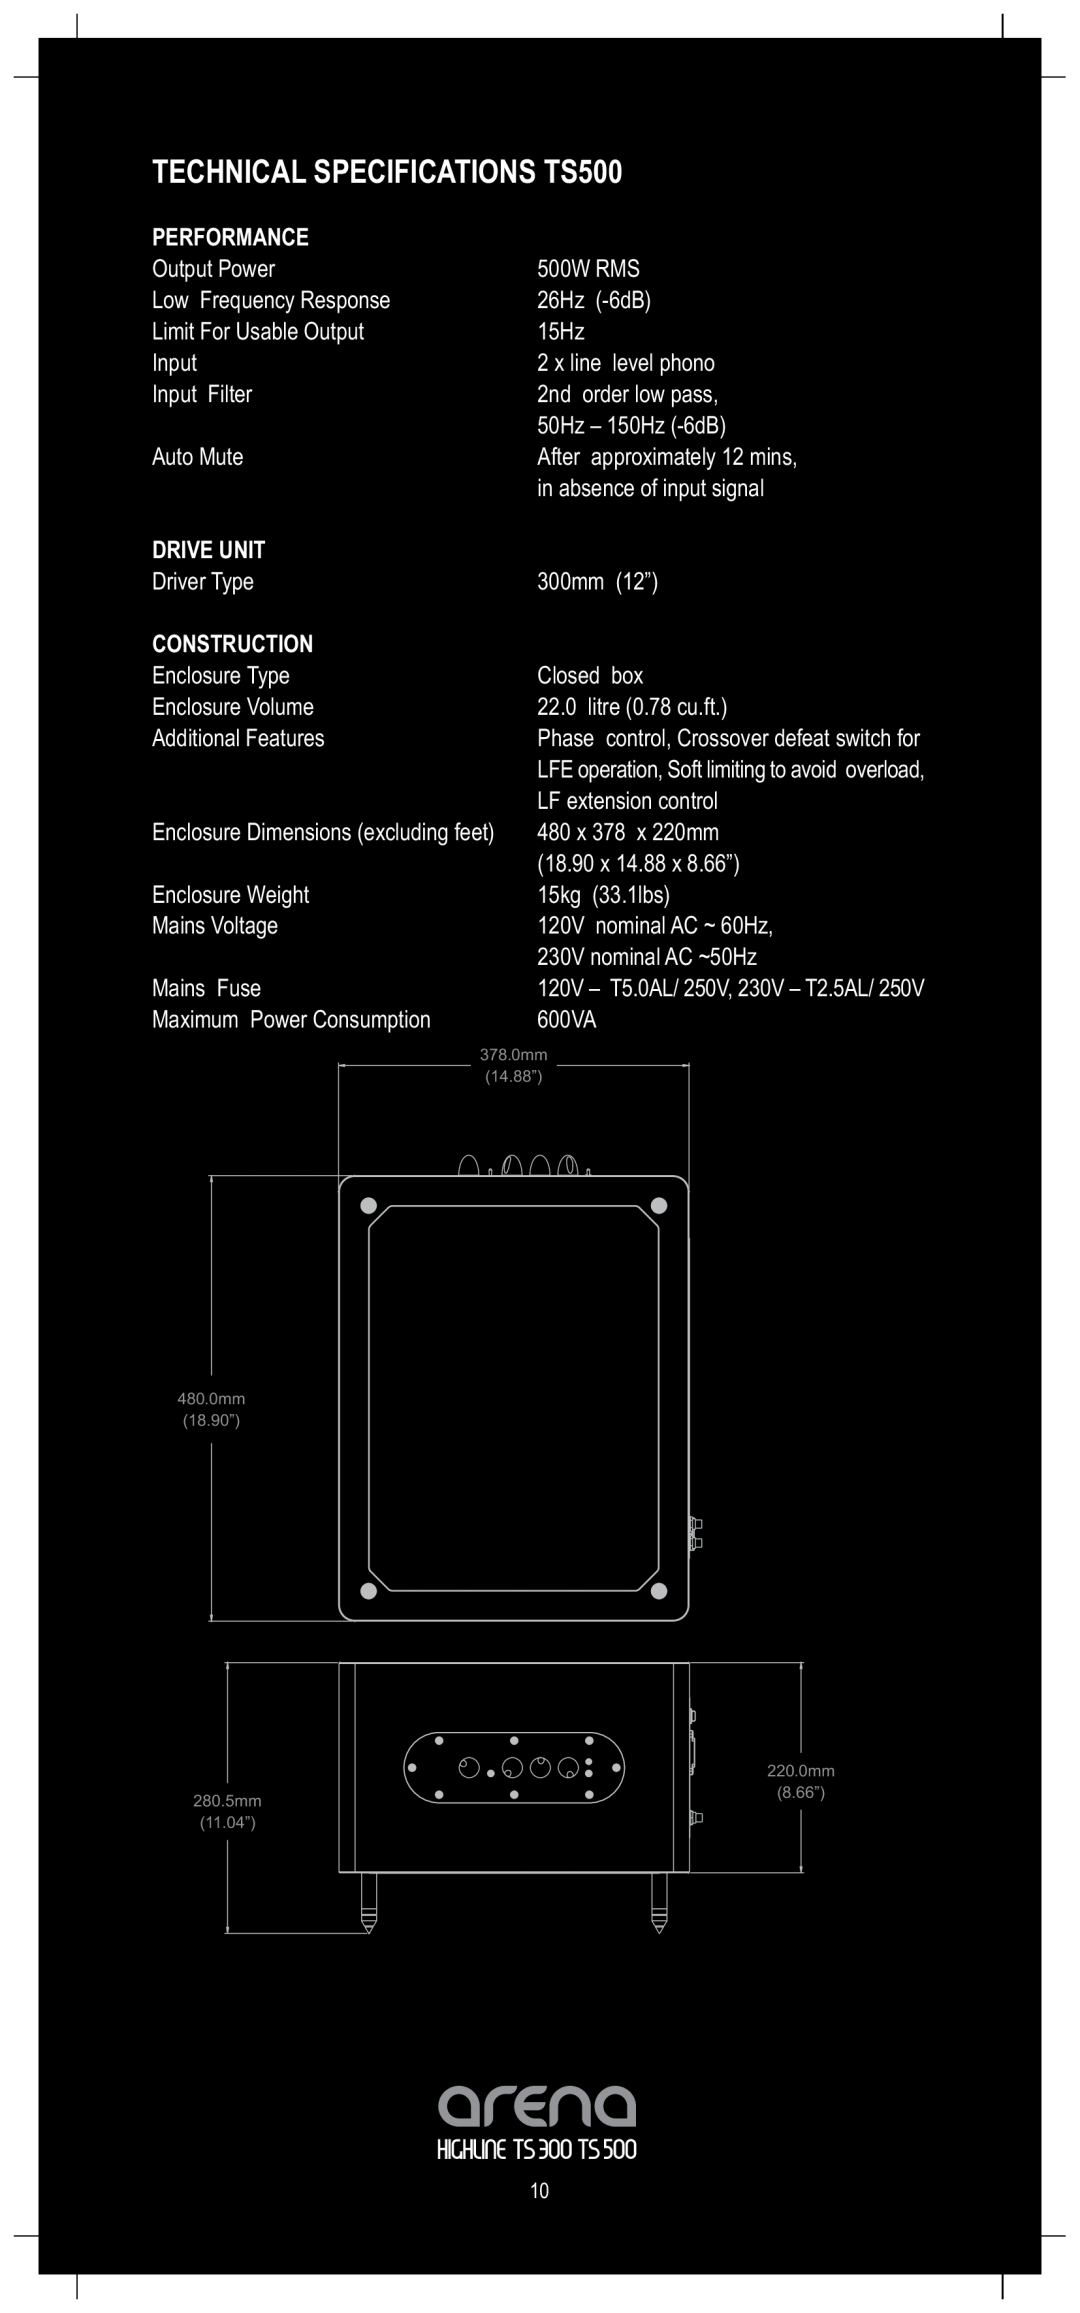 TOA Electronics TS300 owner manual TECHNICAL SPECIFICATIONS TS500, Performance, Drive Unit, Construction 